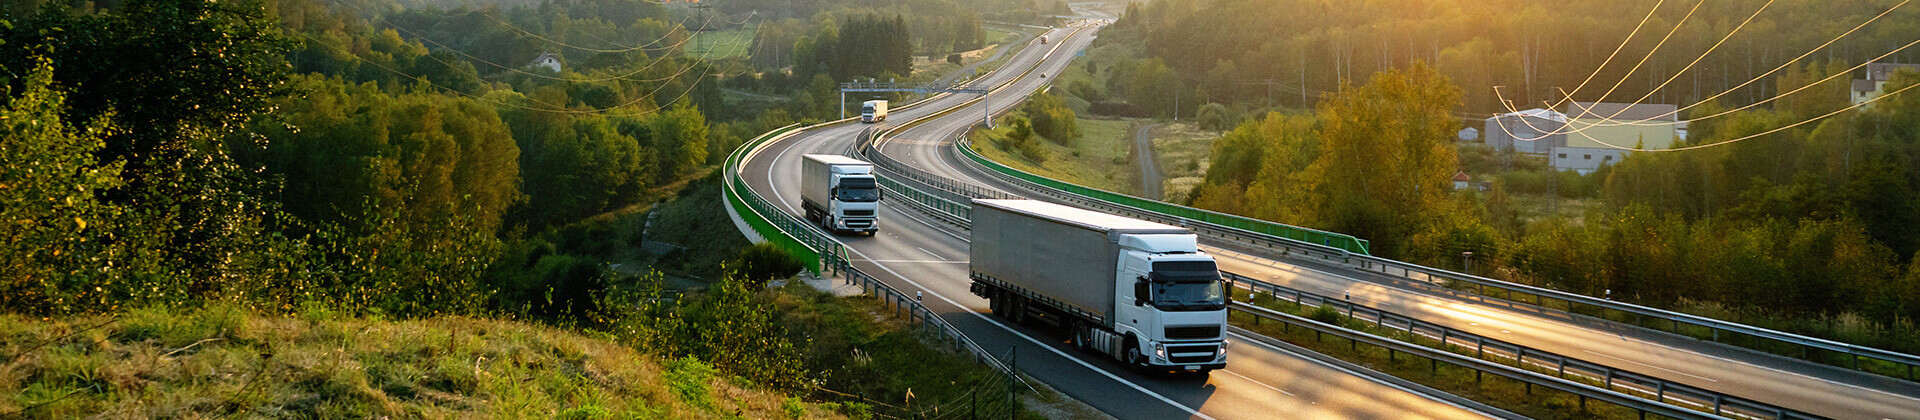 Two lorries driving on a motorway surrounded by green forests at dusk.